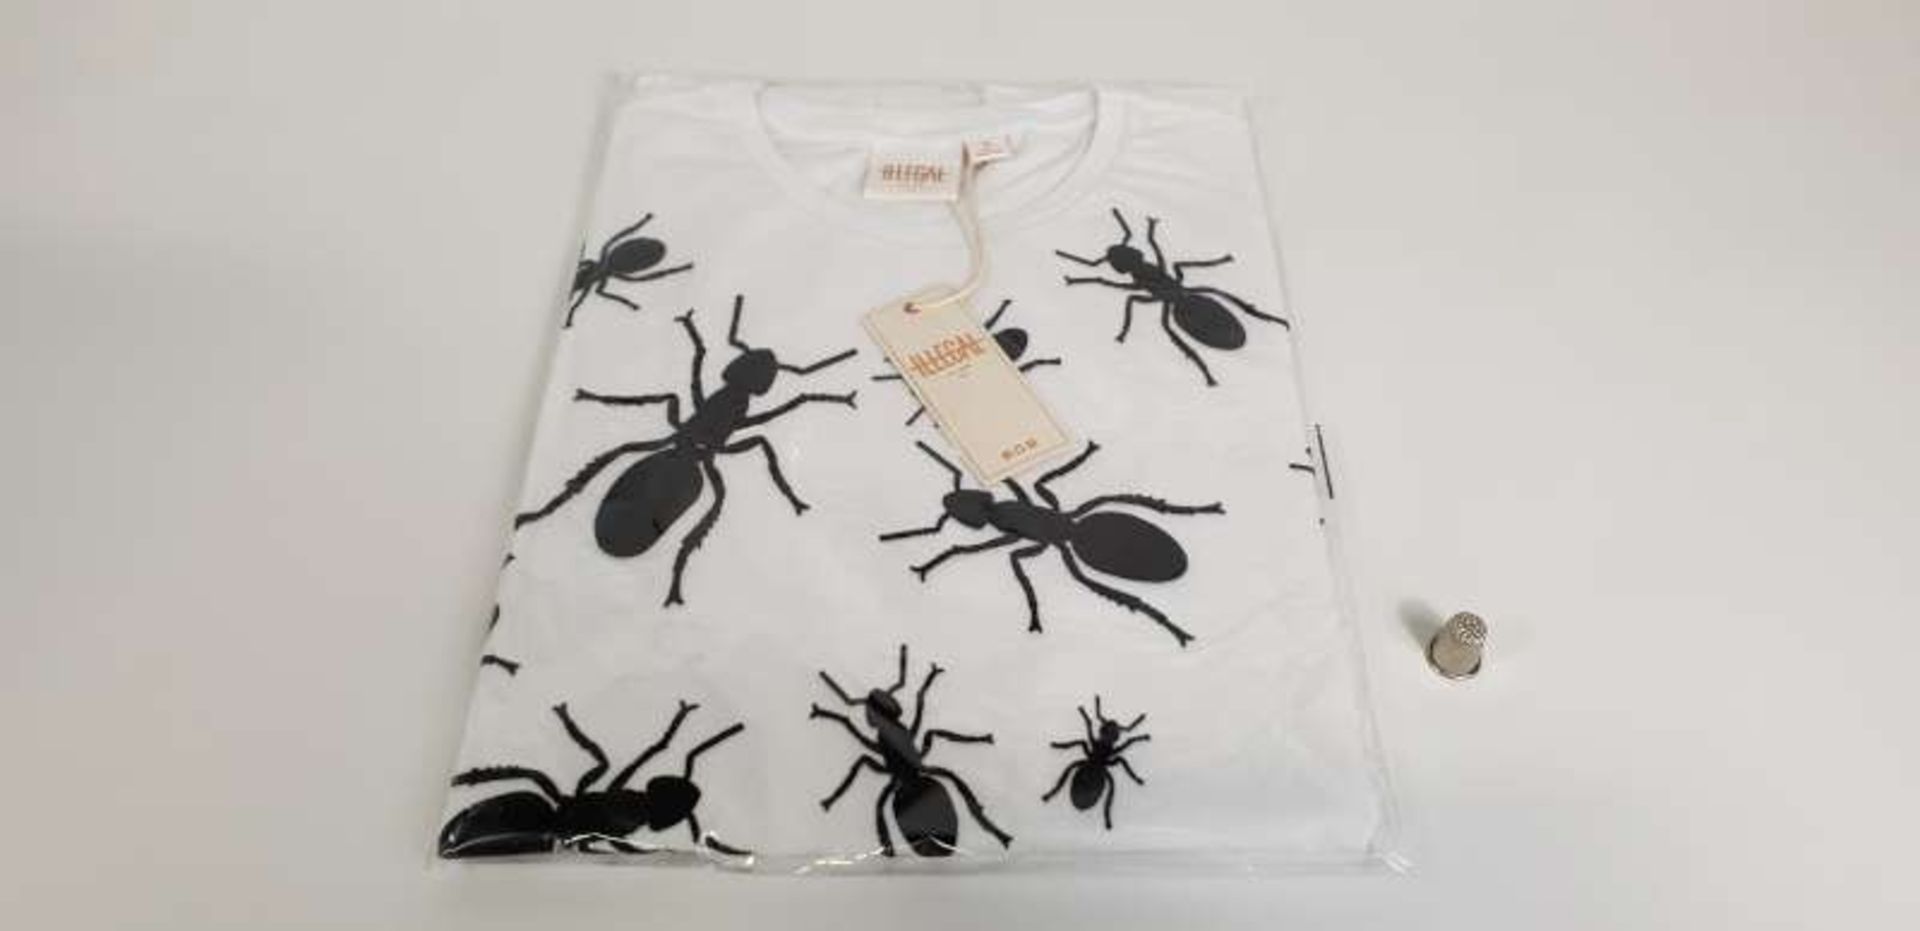 10 X BRAND NEW ILLEGAL CLUB PARIS T SHIRTS WITH ANT PRINT DETAIL IN VARIOUS SIZES